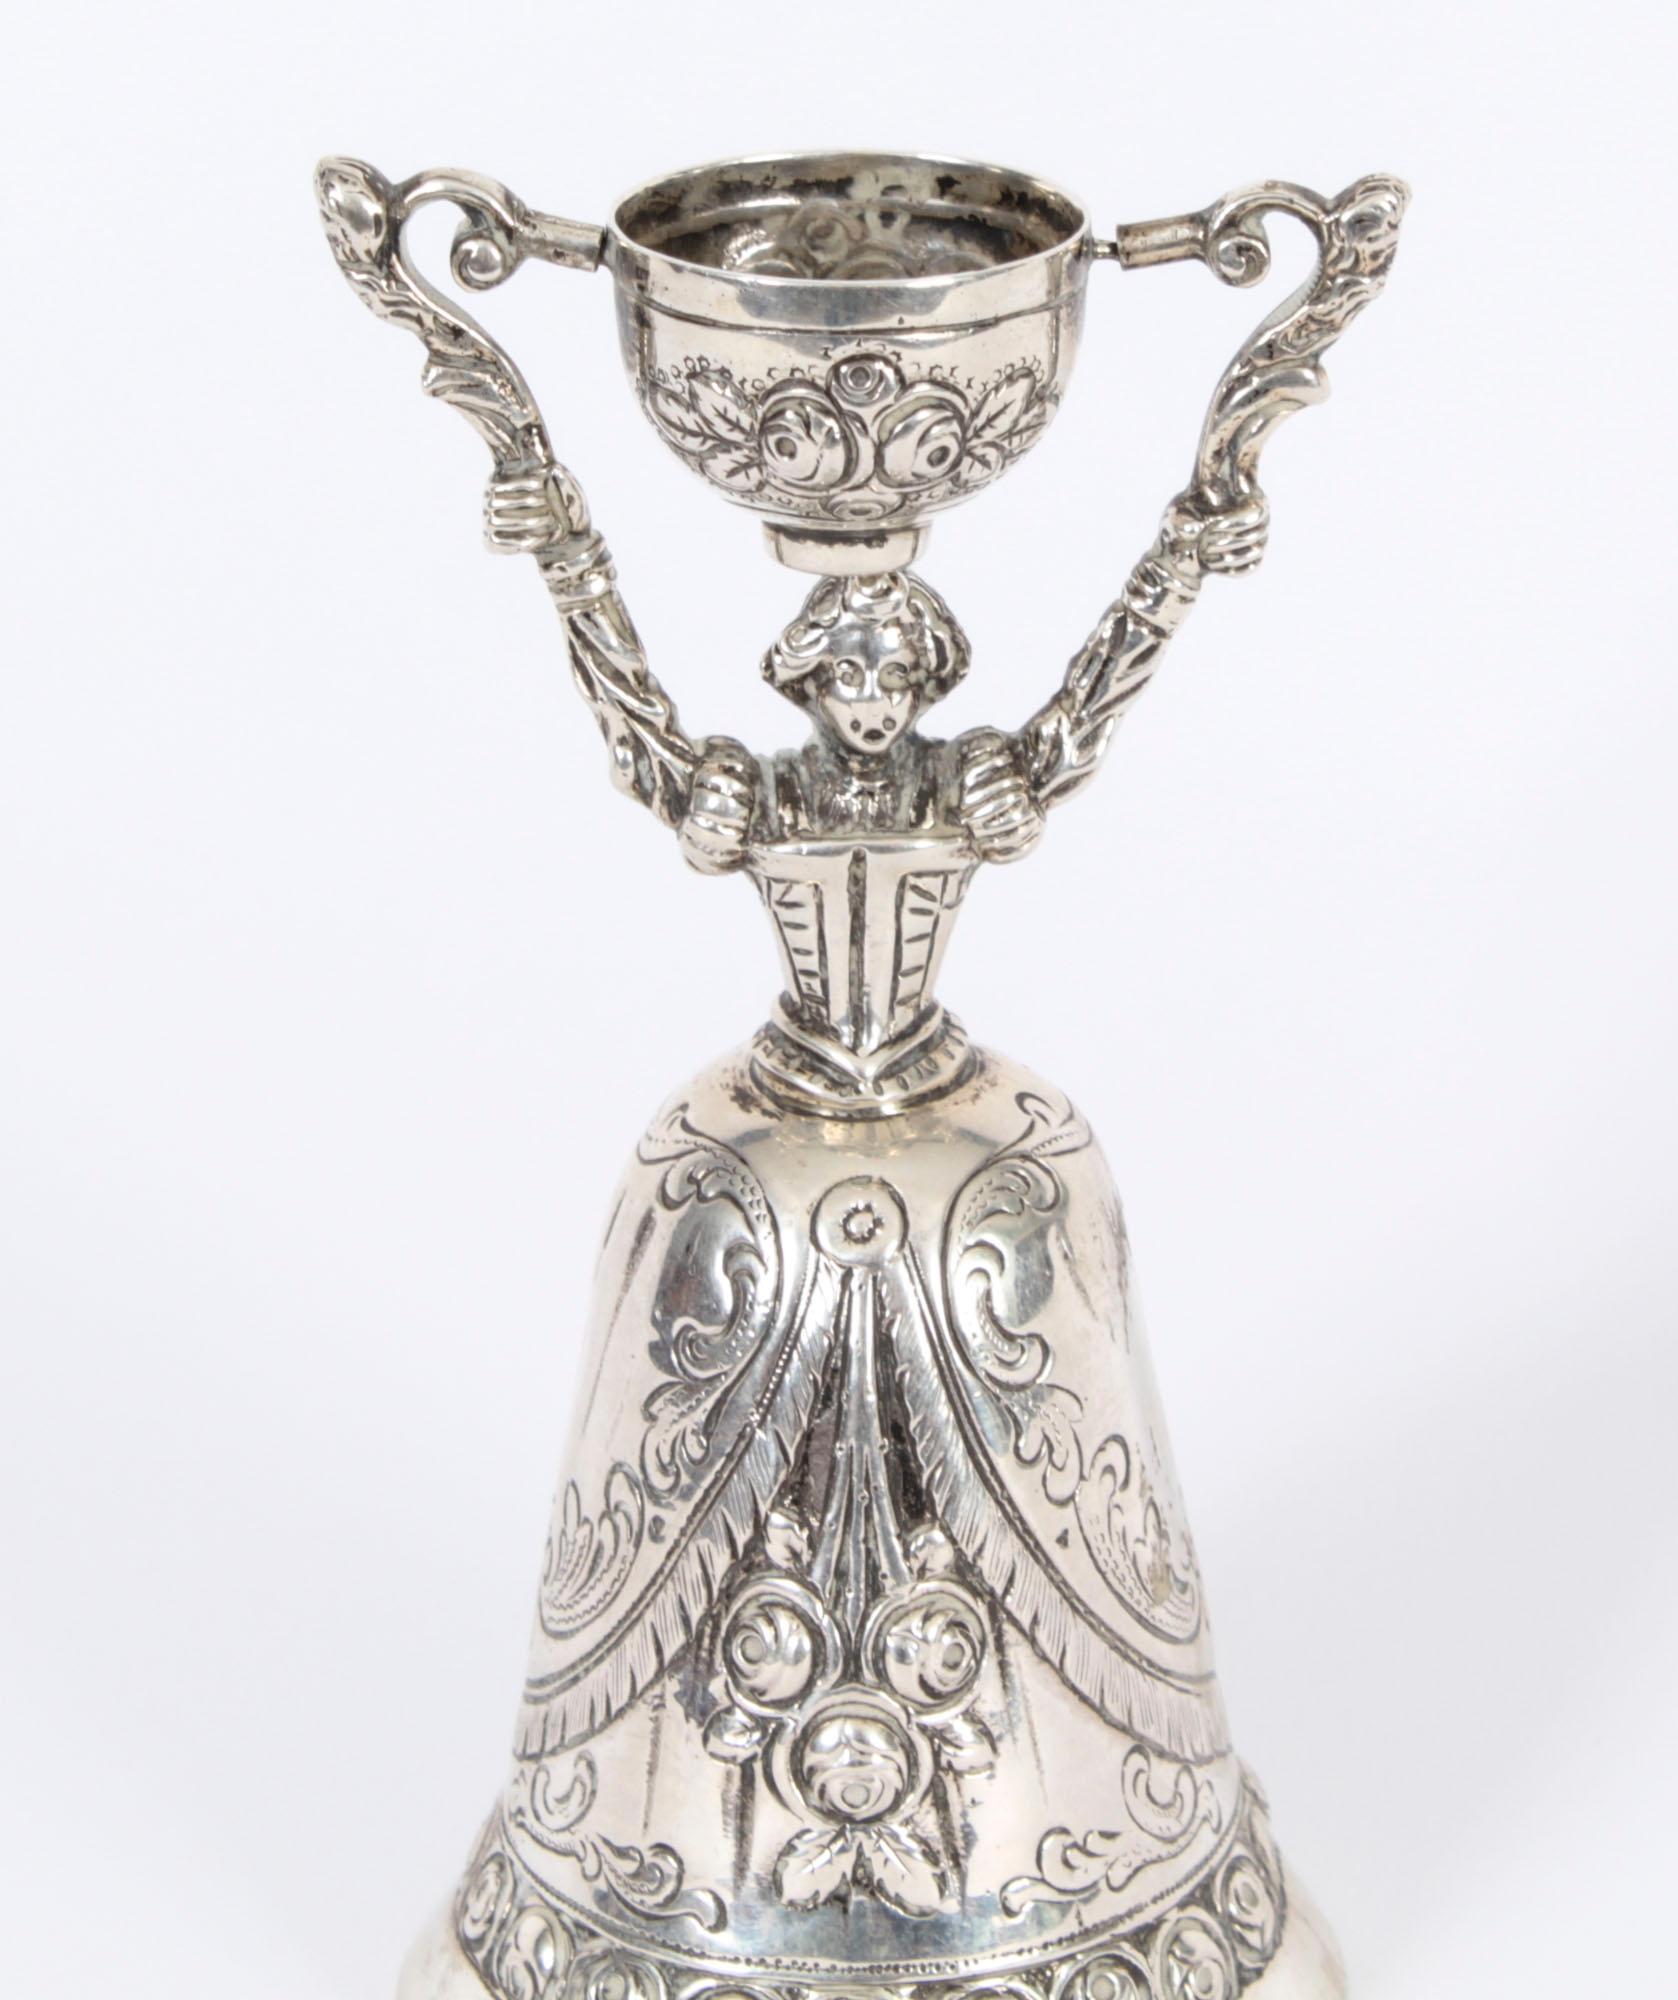 This is a charming antique .835 silver marriage cup, with Dutch hallmarks,  circa 1880 in date.

Condition:
In excellent condition with no dings, dents or signs of repair.

Please see photos for confirmation.

Dimensions in cm:
Height 11 cm x Width